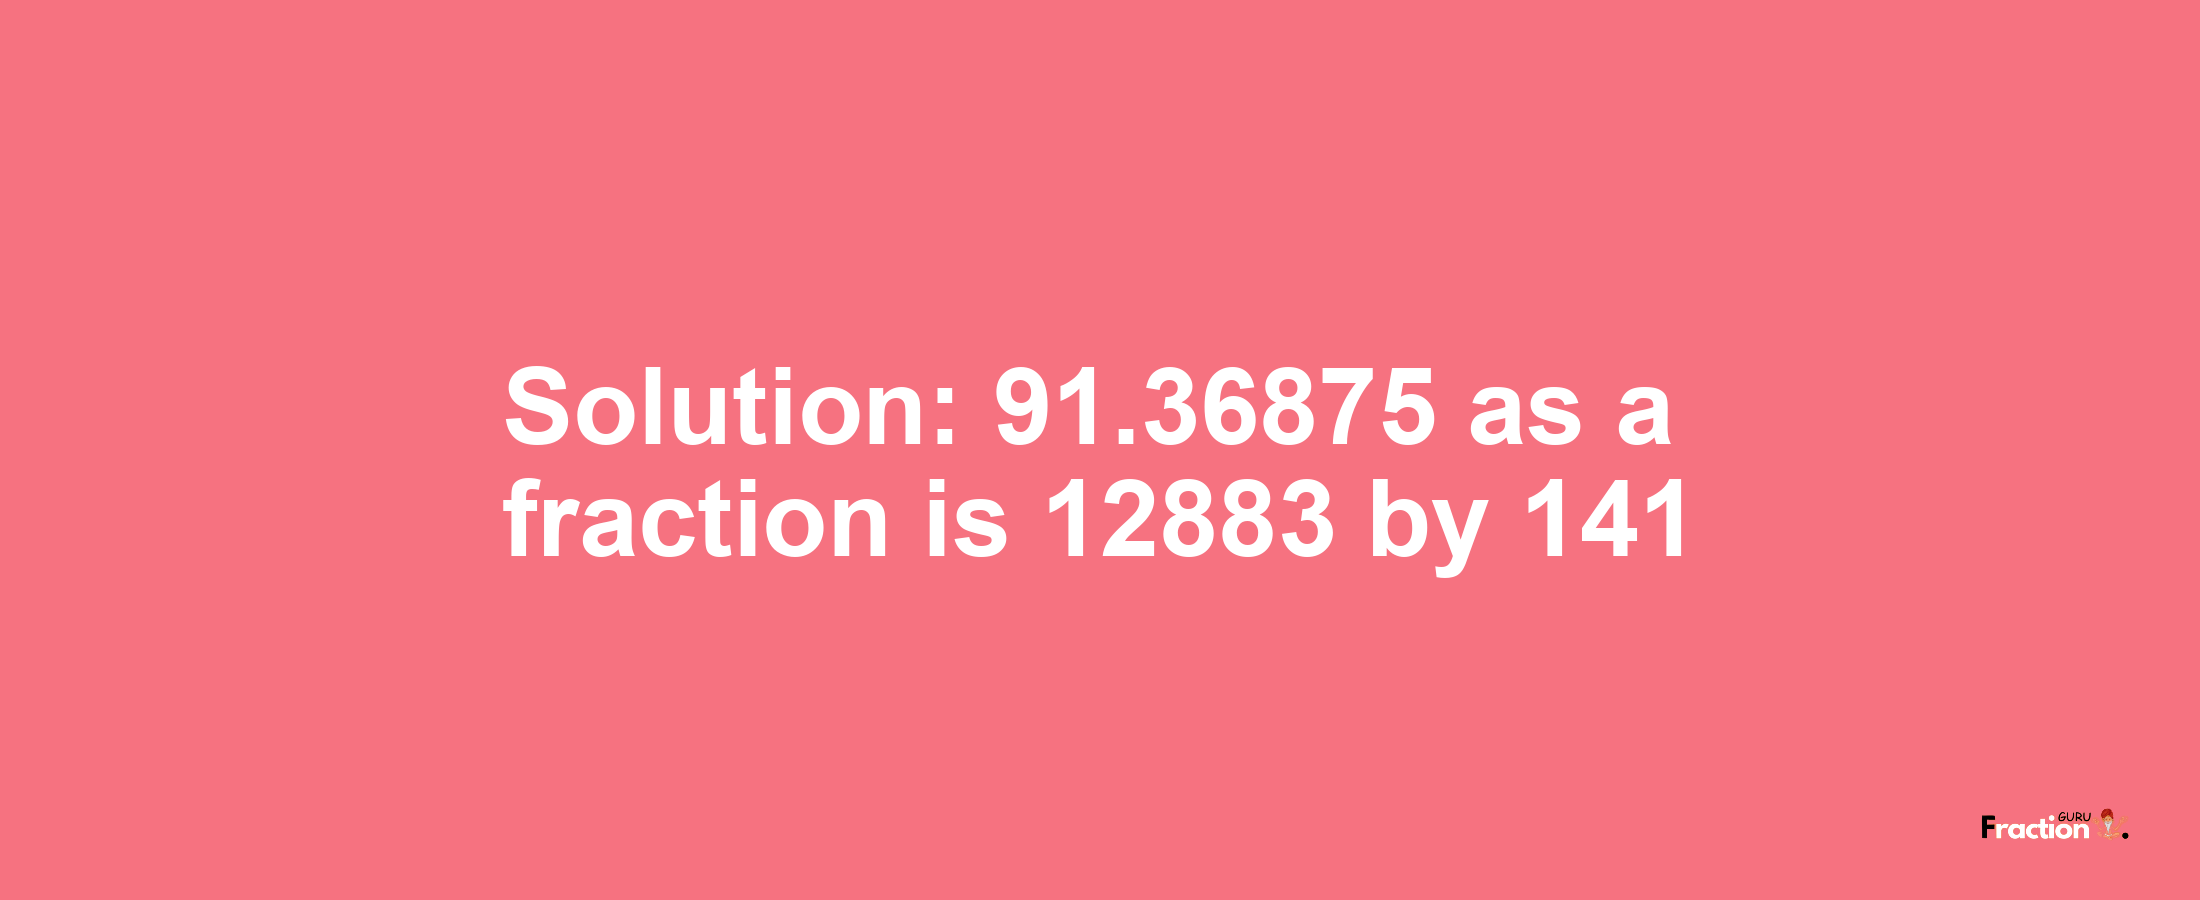 Solution:91.36875 as a fraction is 12883/141